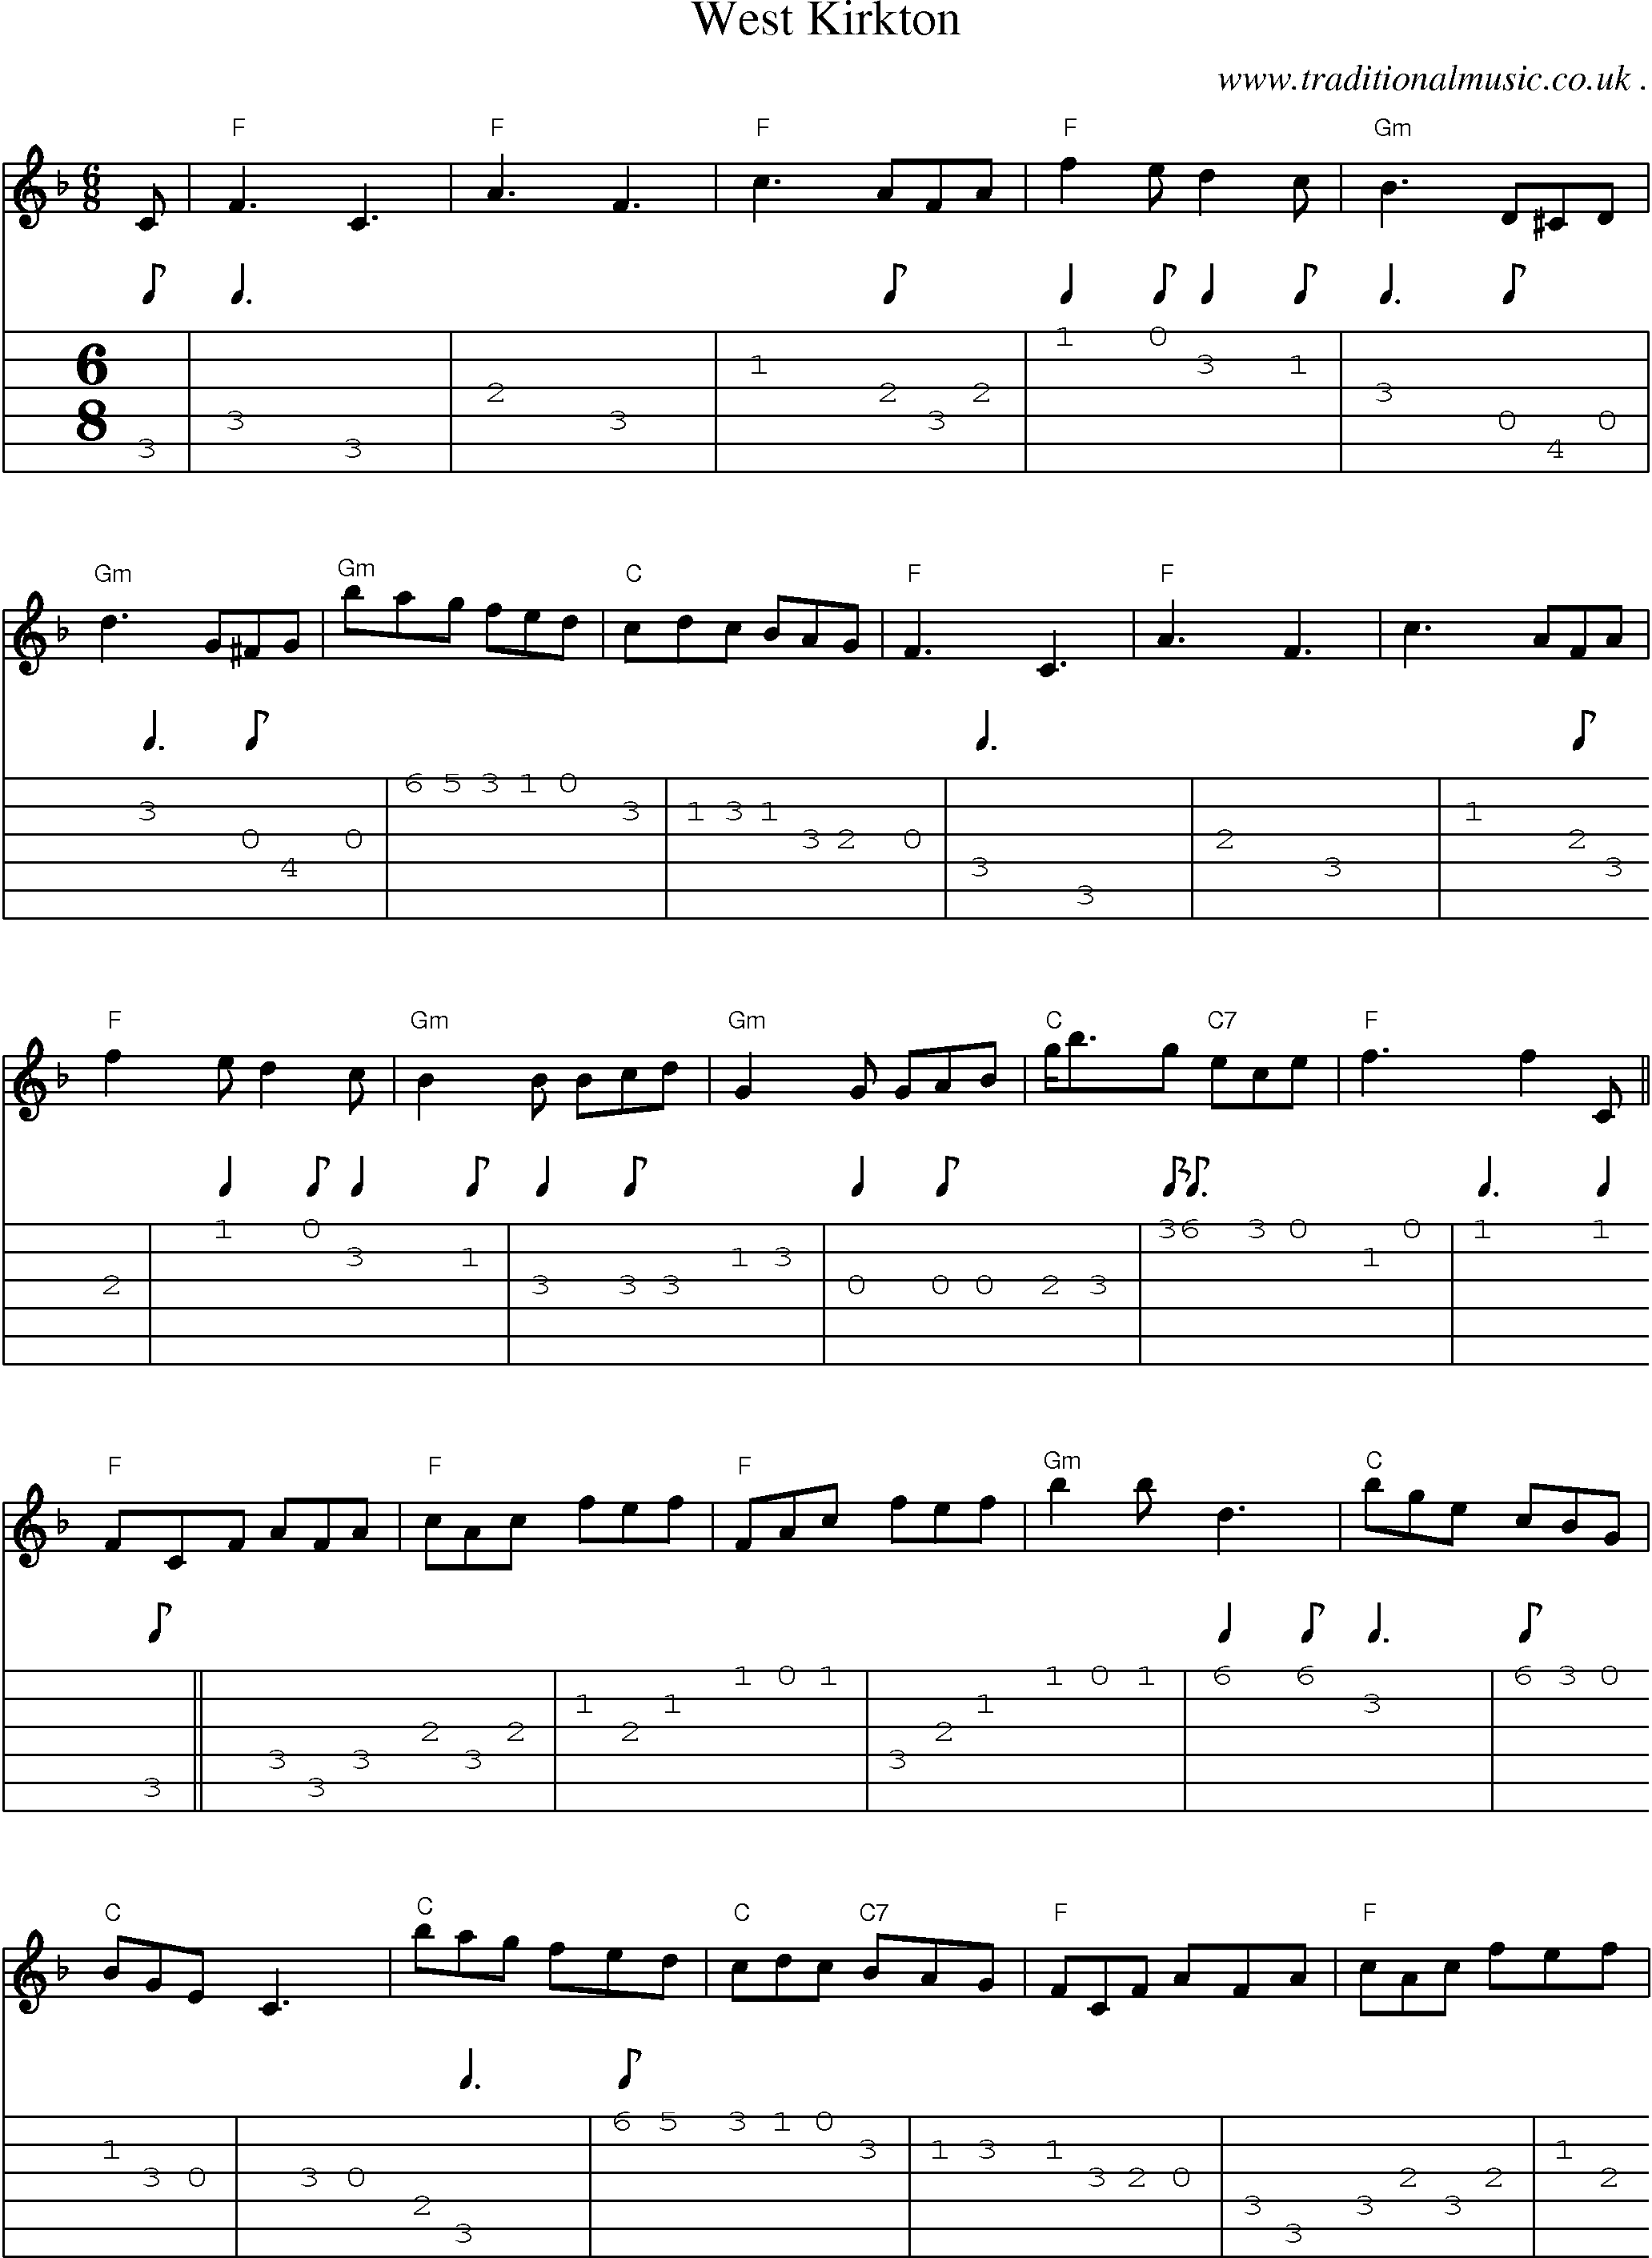 Sheet-music  score, Chords and Guitar Tabs for West Kirkton